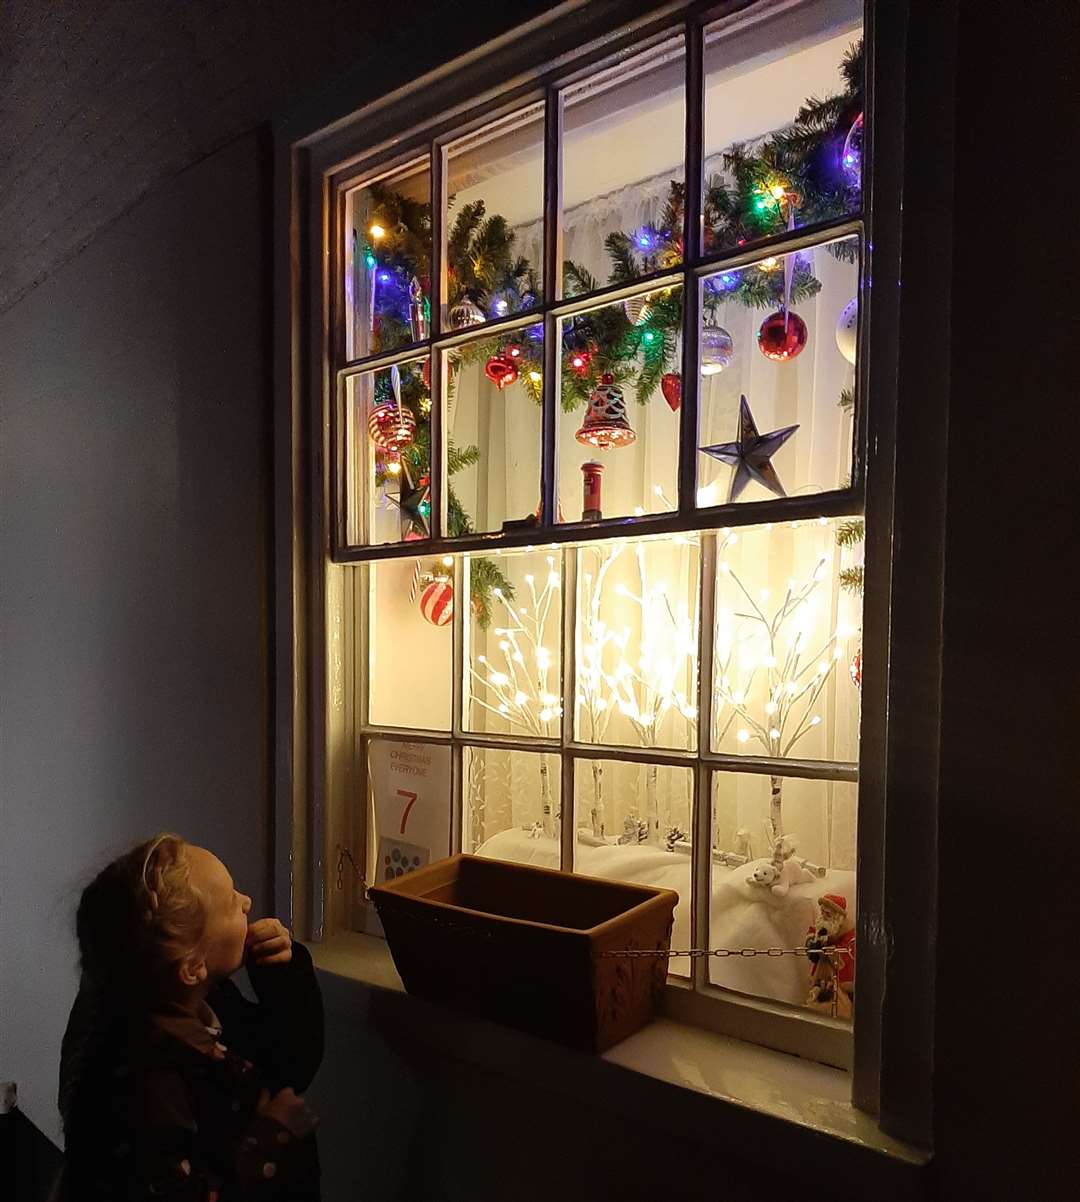 People can admire the decorated windows at different locations around Sandwich